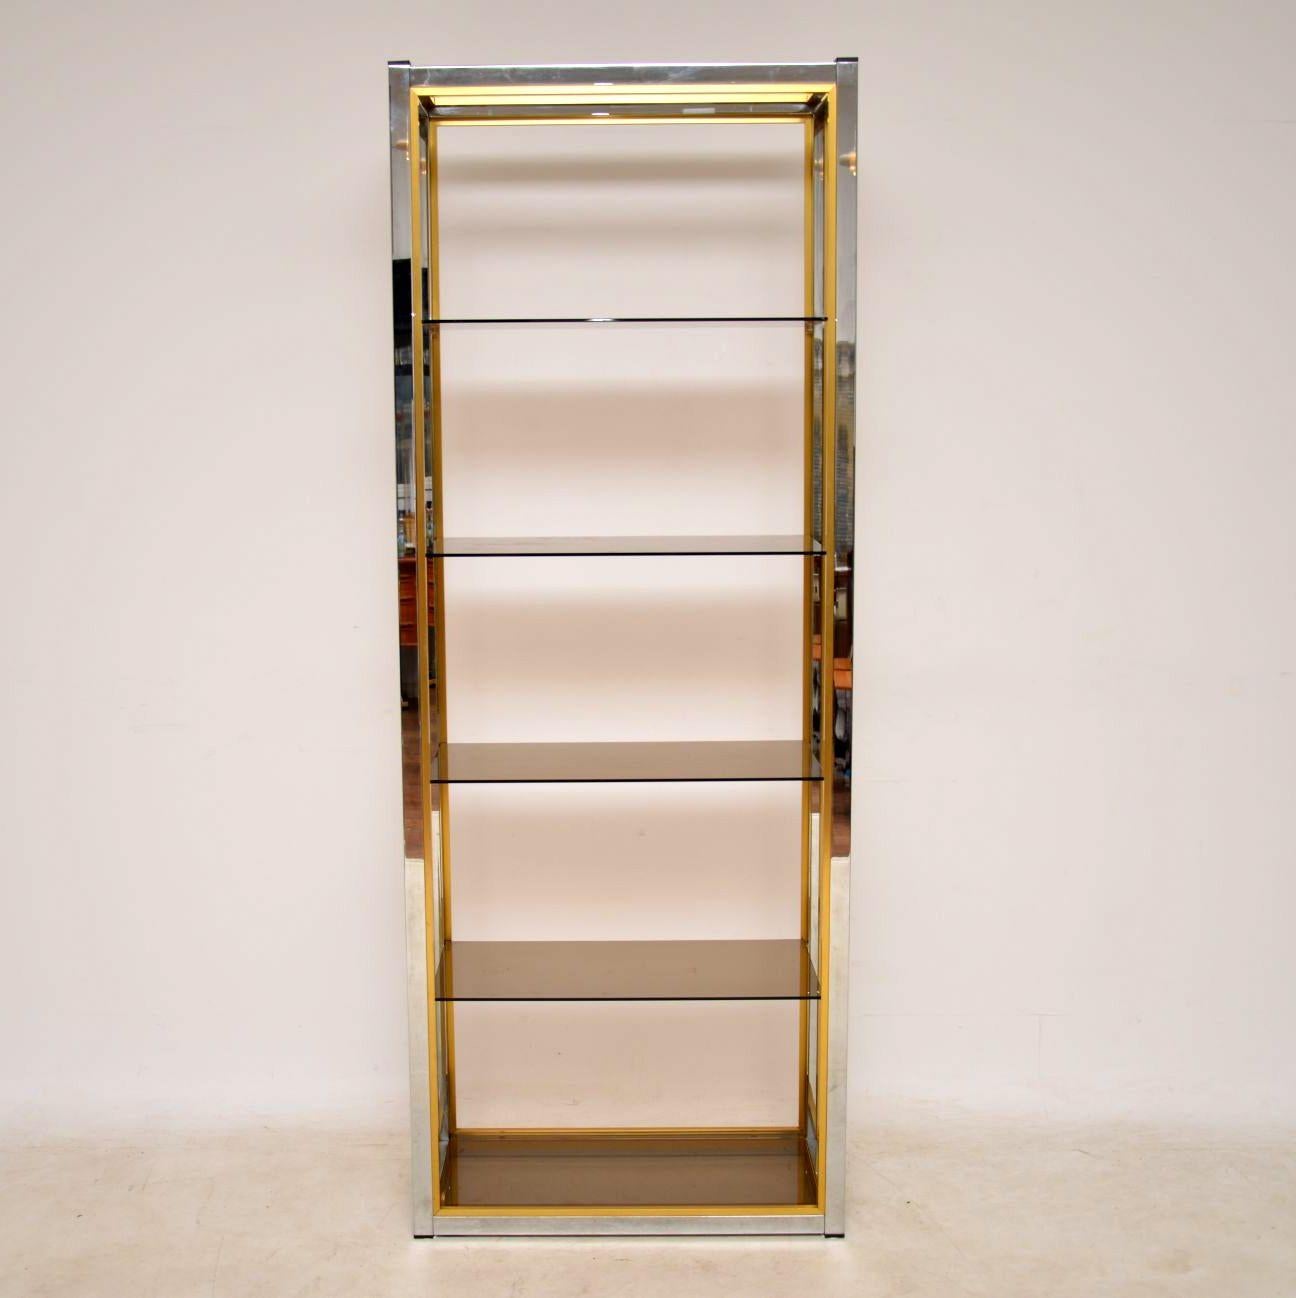 A stunning vintage bookcase / cabinet made in Italy during the 1970s, this was designed by Renato Zevi. These were originally retailed in Harrods, the quality is superb. The condition of this is excellent, with only some extremely minor surface